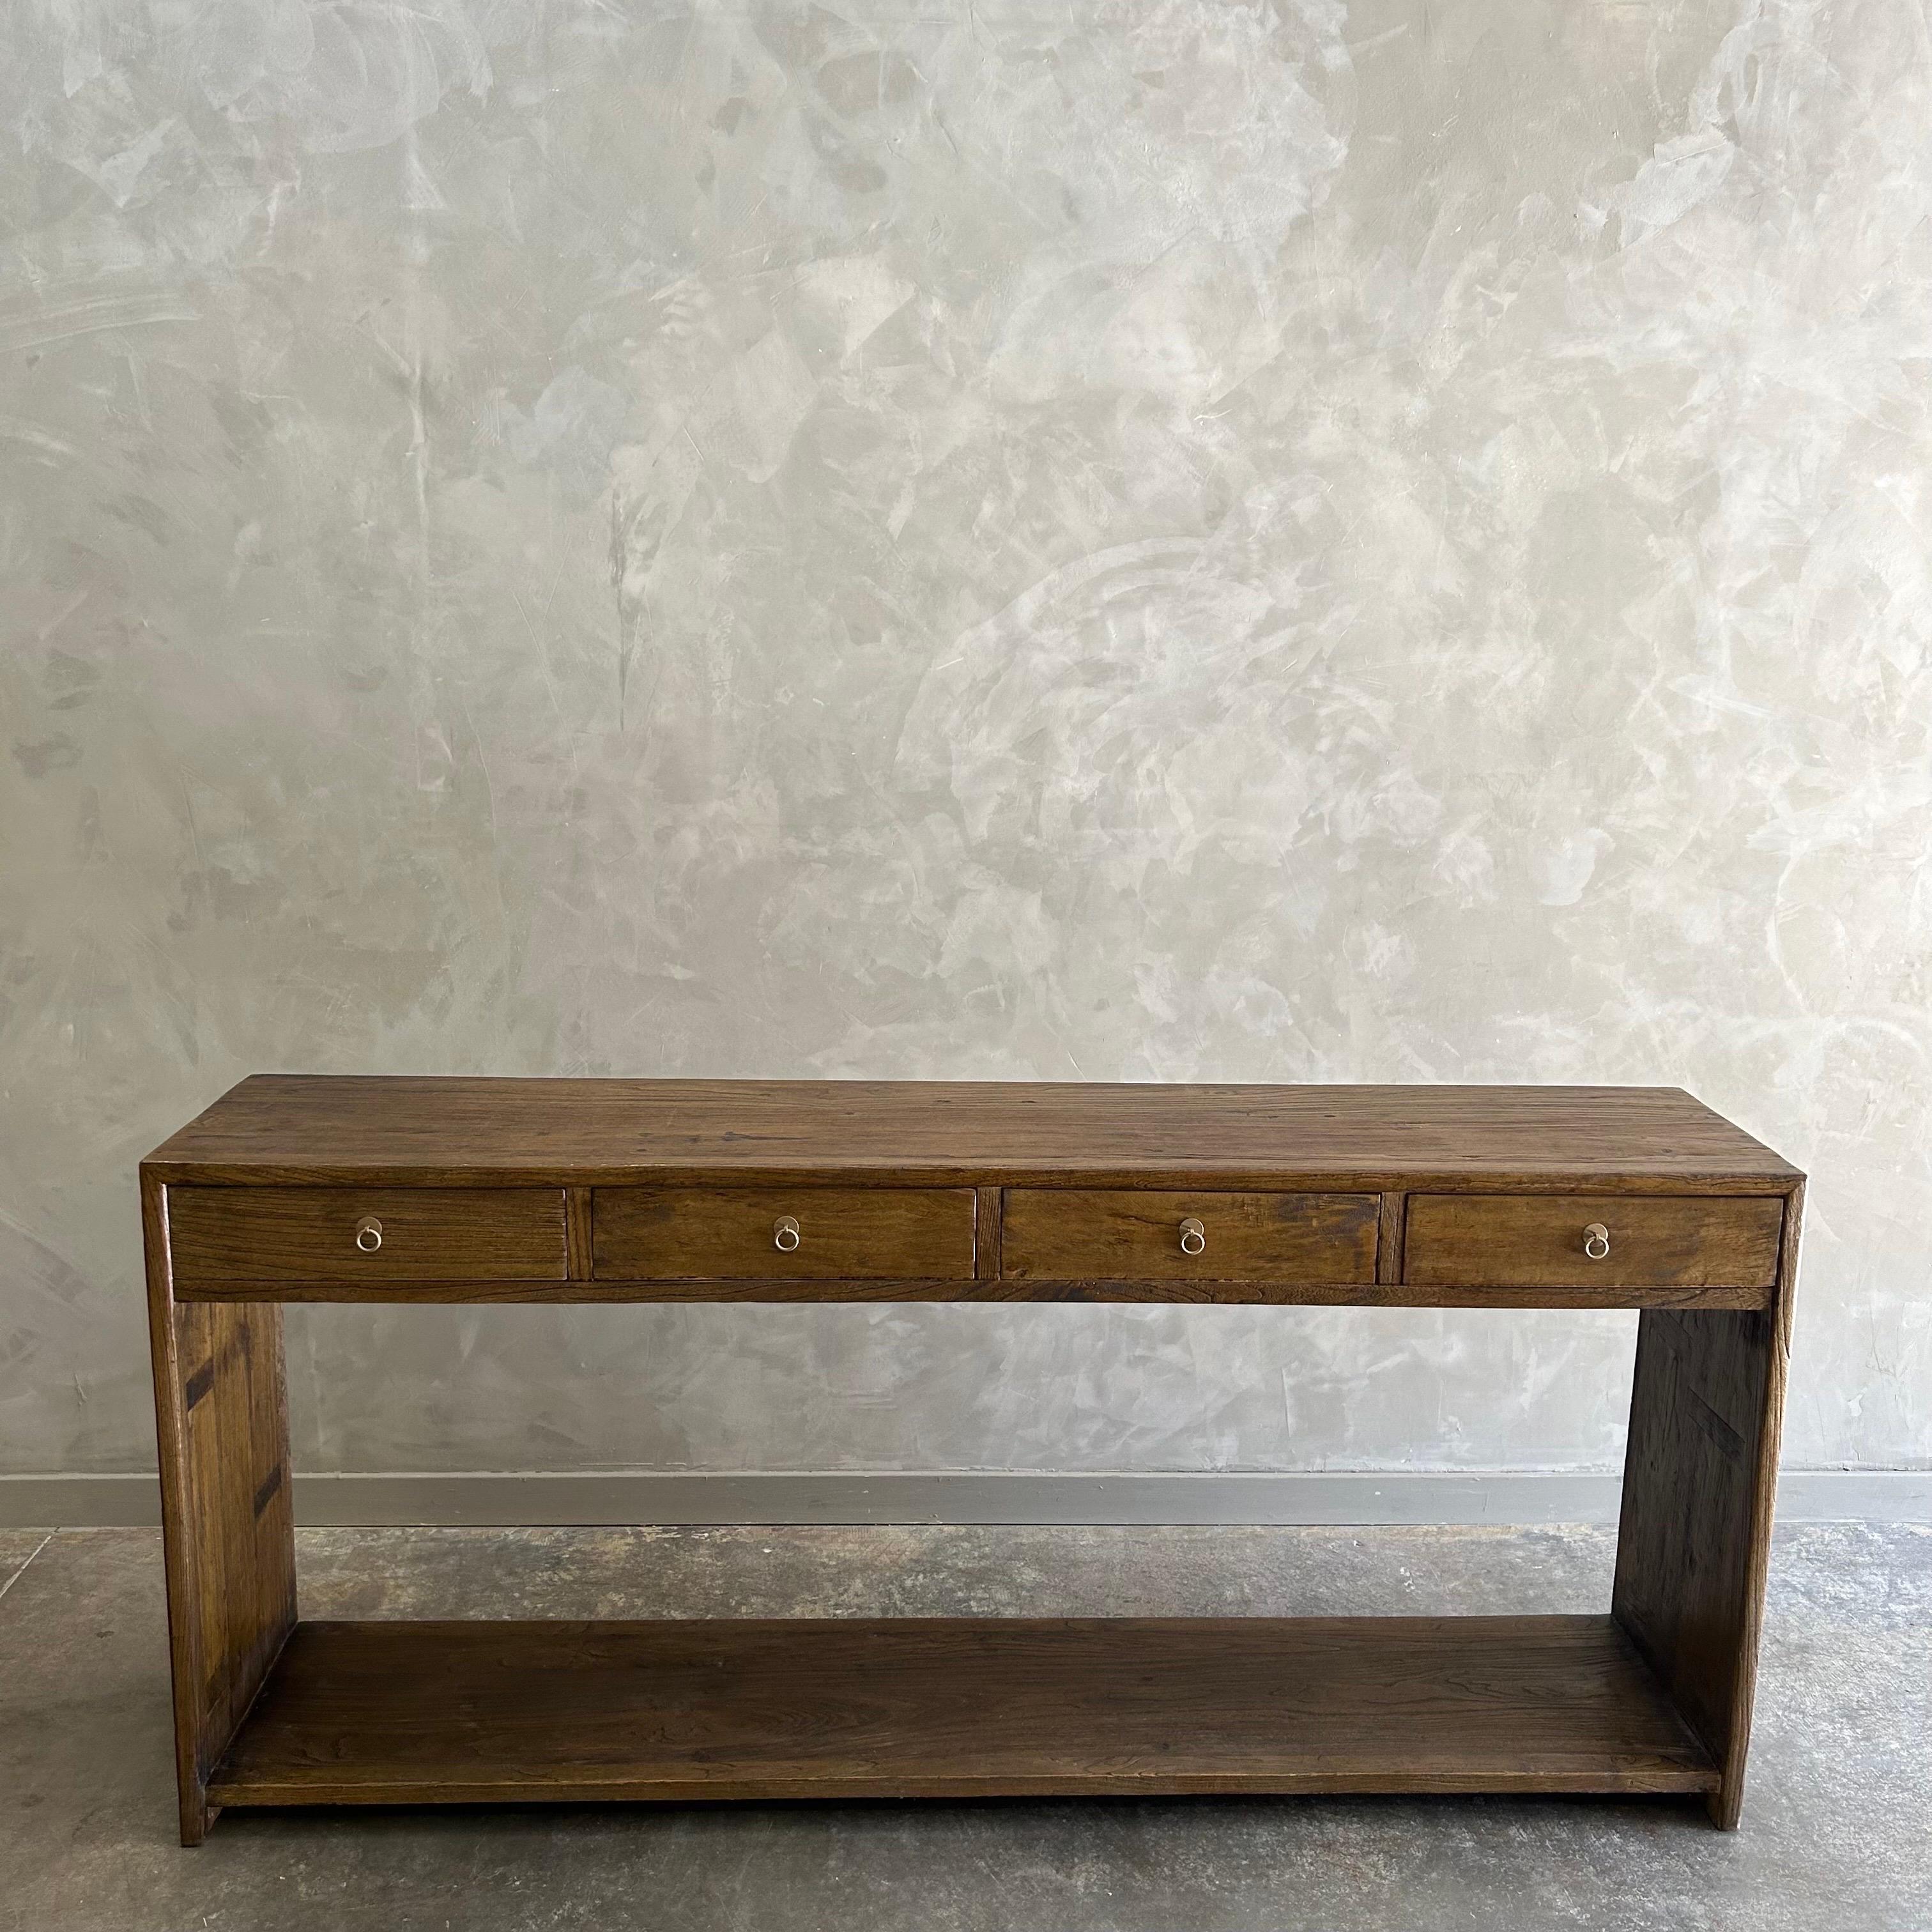 BH COLLECTION
Ivan Drawer Console Drawer 
The Iman Console is made from beautiful but durable Elm Wood and features 4 drawers for extra storage. The Ivan Console makes the perfect entryway piece, console table or sofa table. Please note variances in